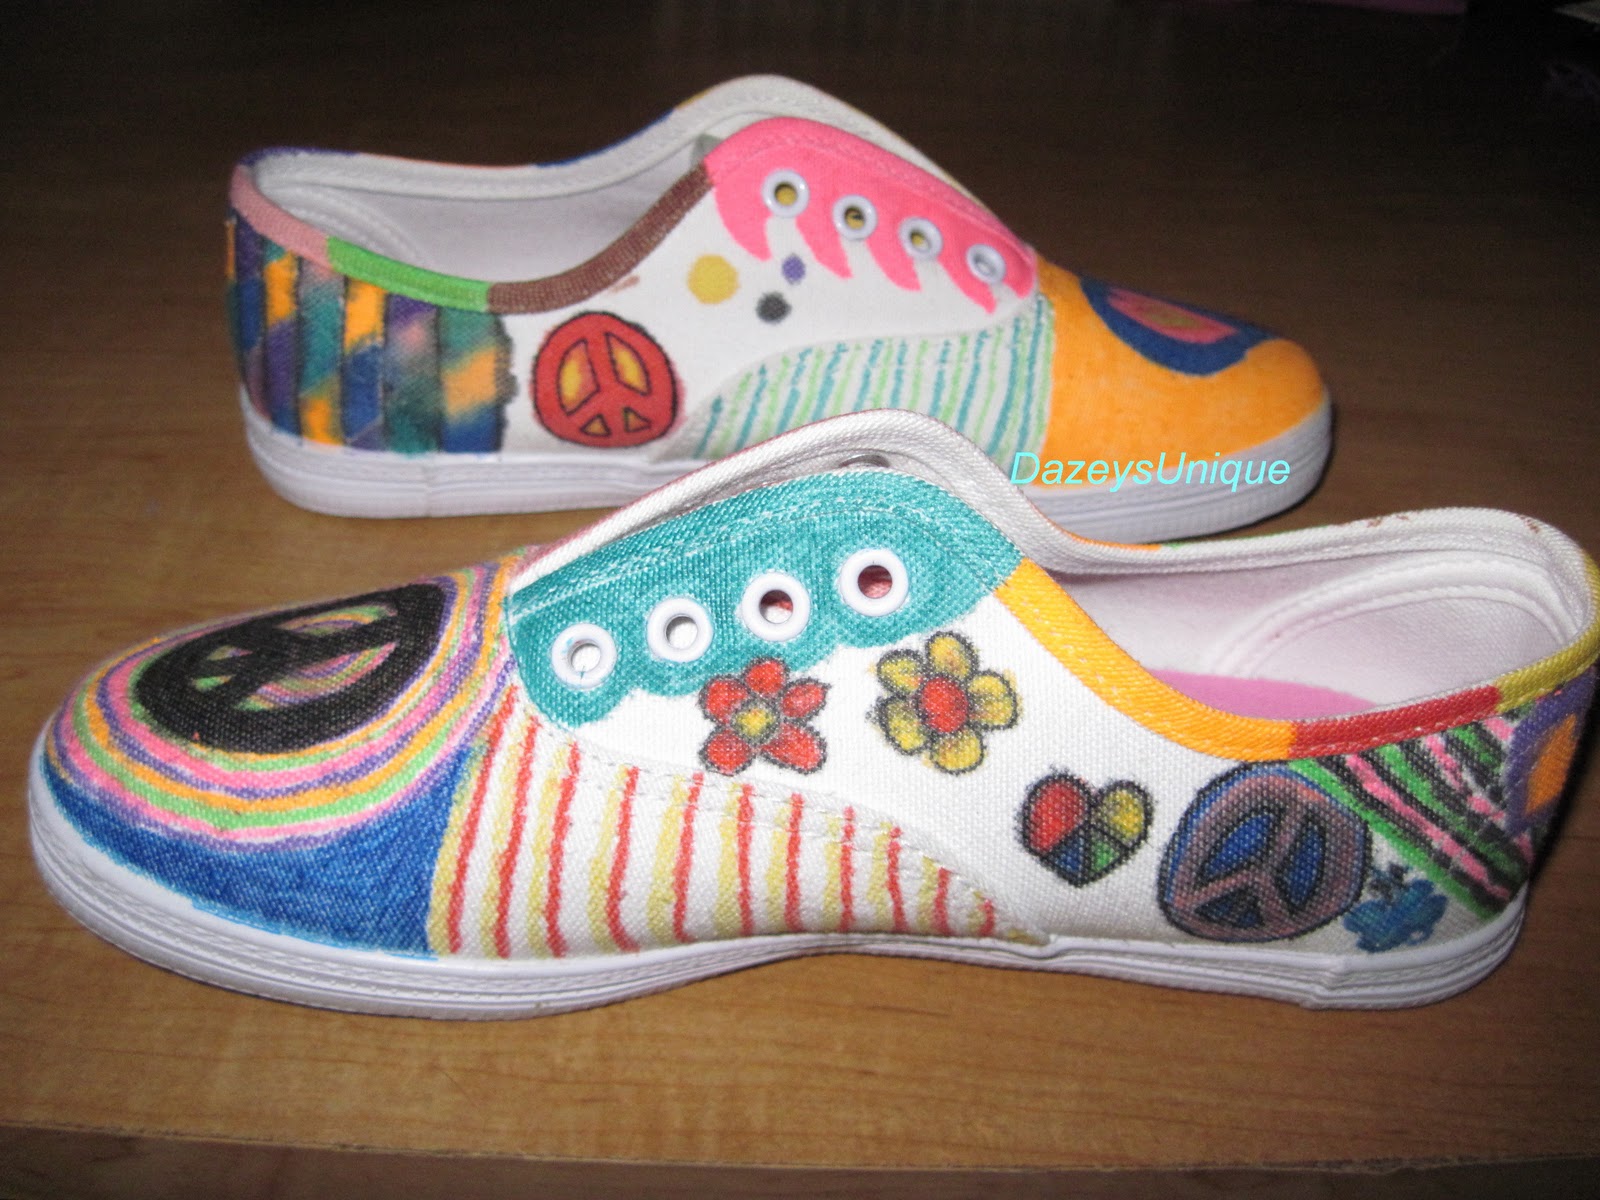 Dazeys Unique: Tulip Fabric Markers and Canvas Shoes